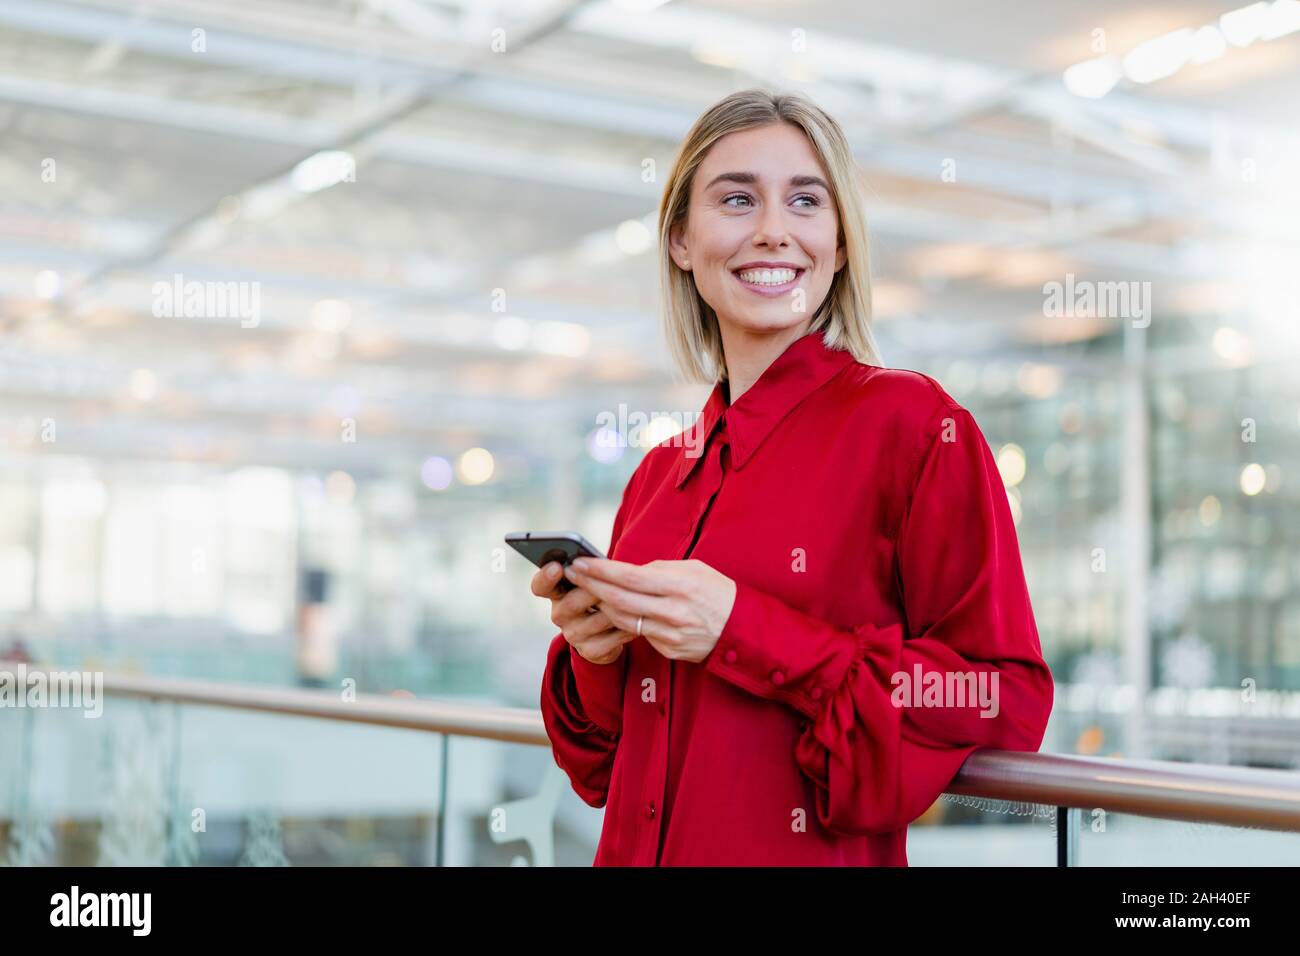 Smiling young businesswoman standing lors d'une balustrade avec cell phone Banque D'Images